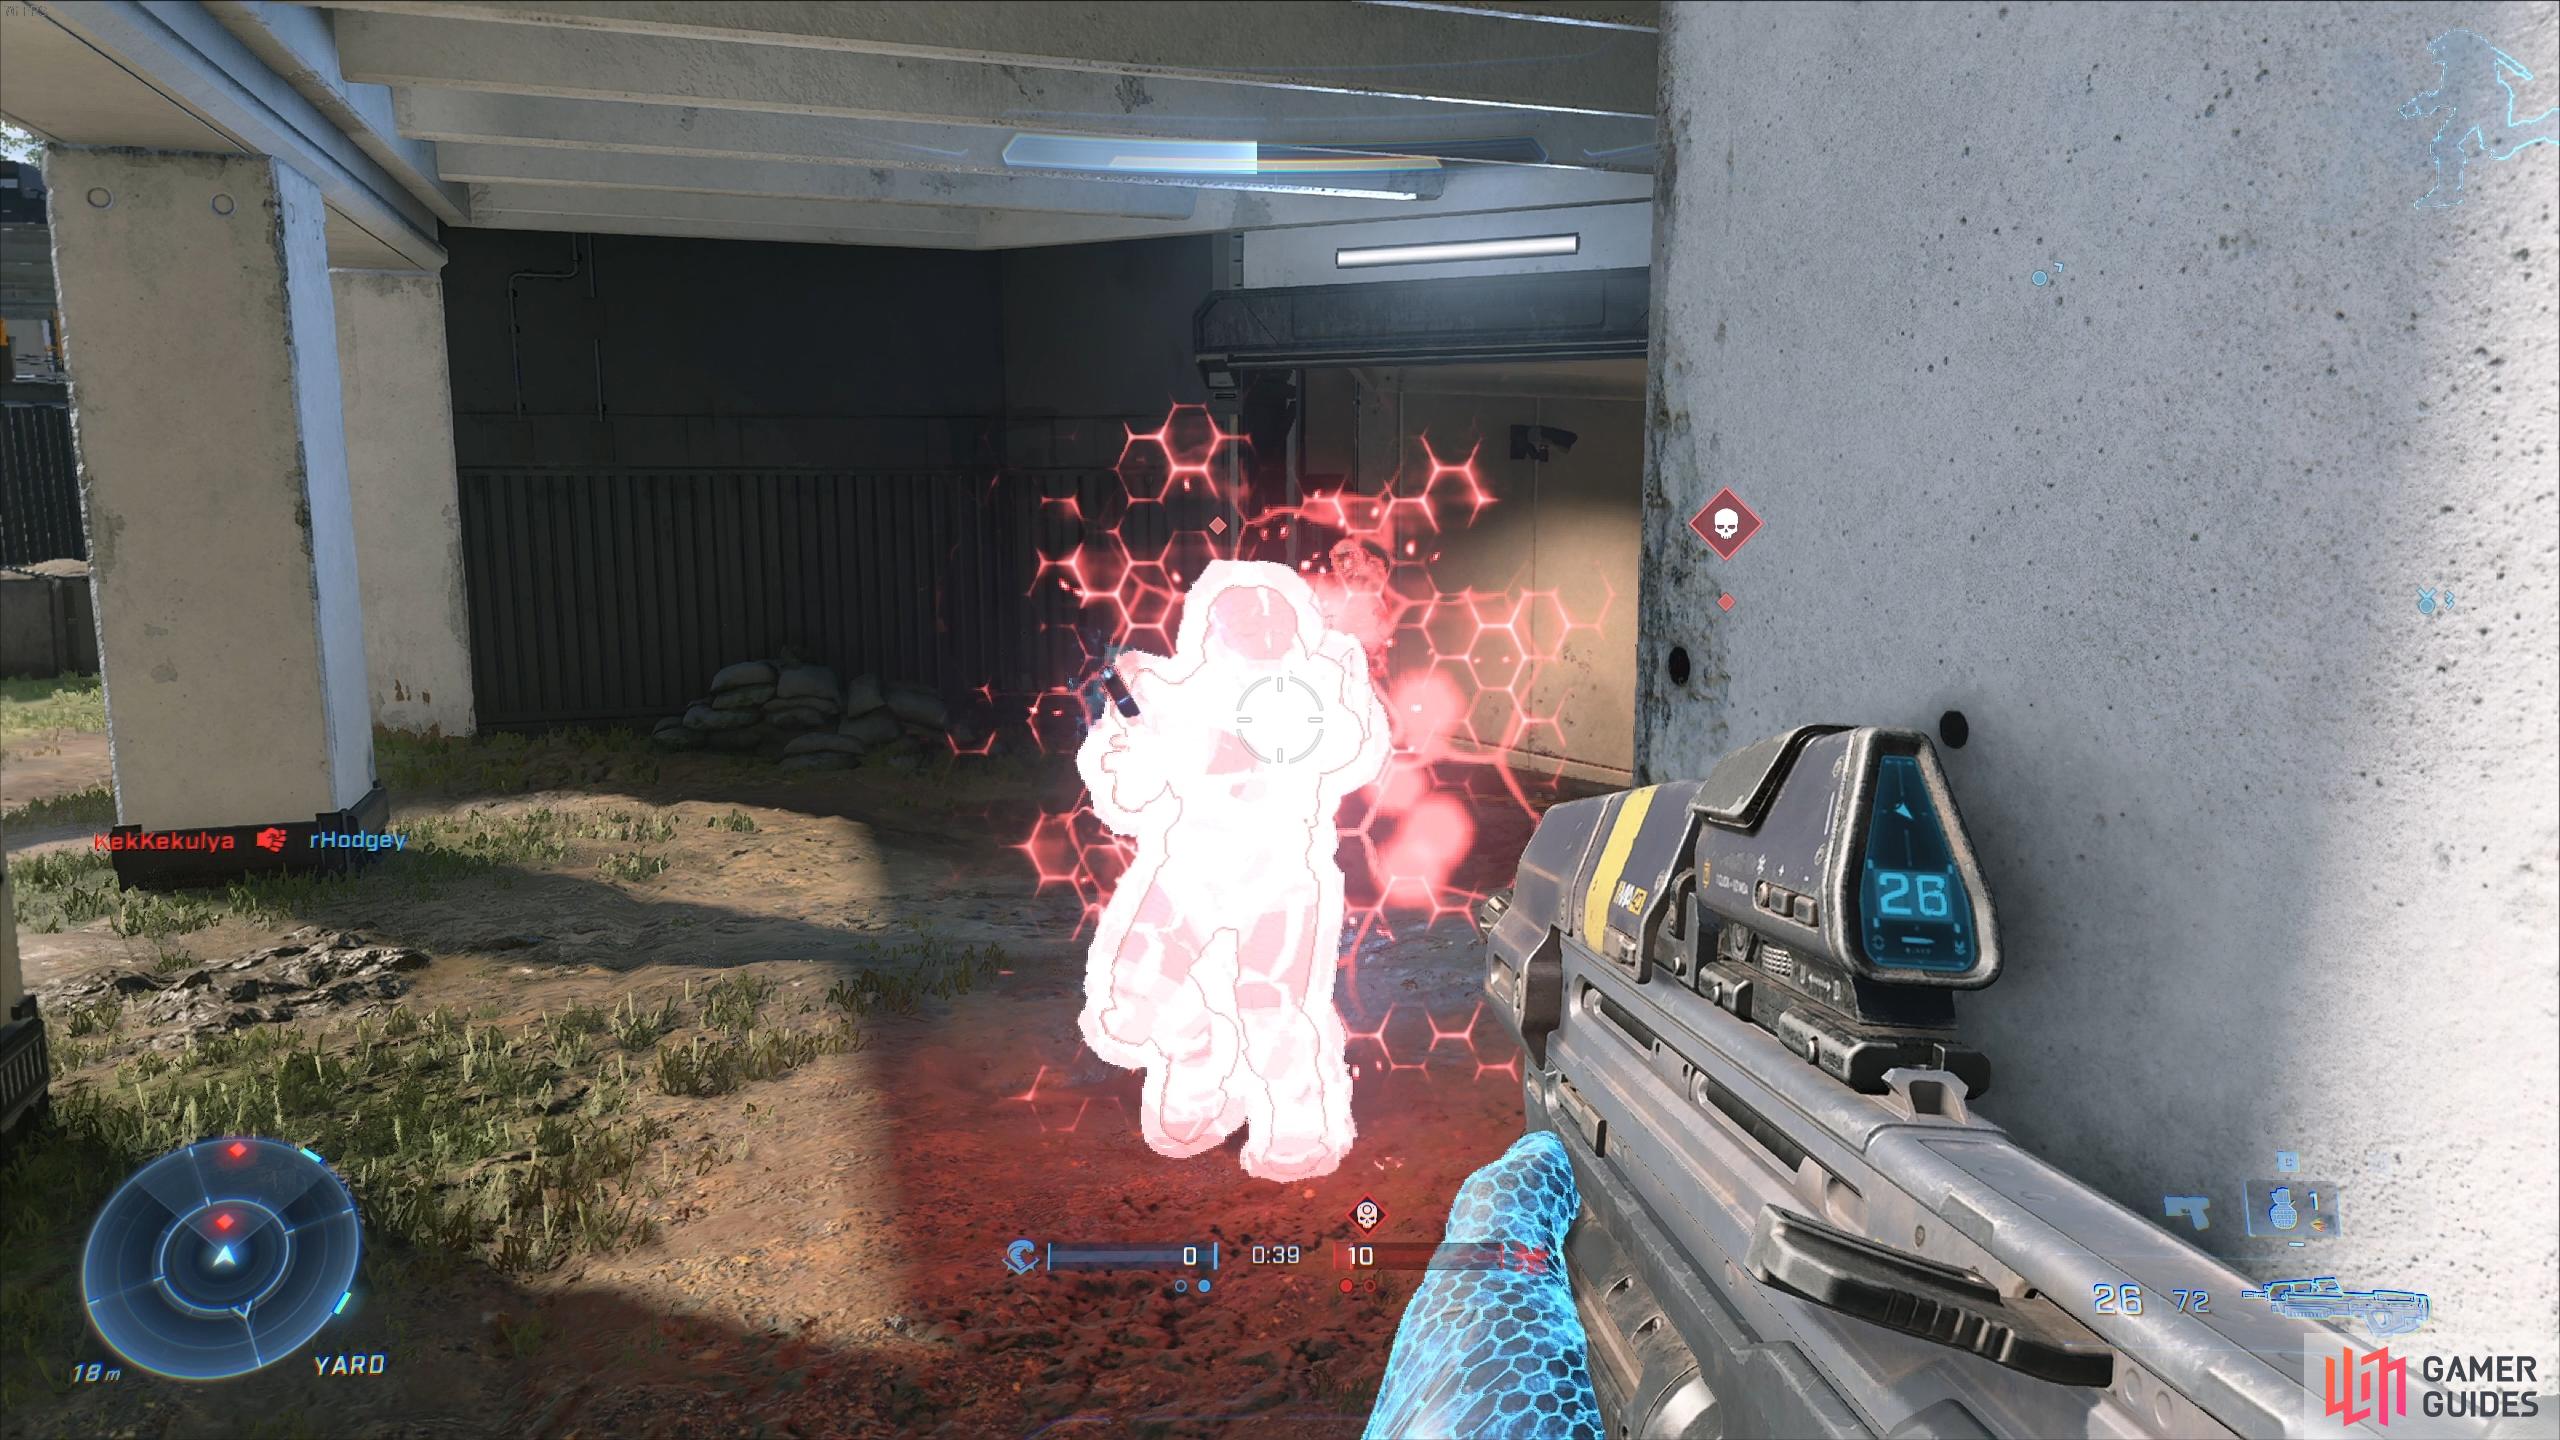 An enemy will glow bright pink for a brief moment when their shield is popped.